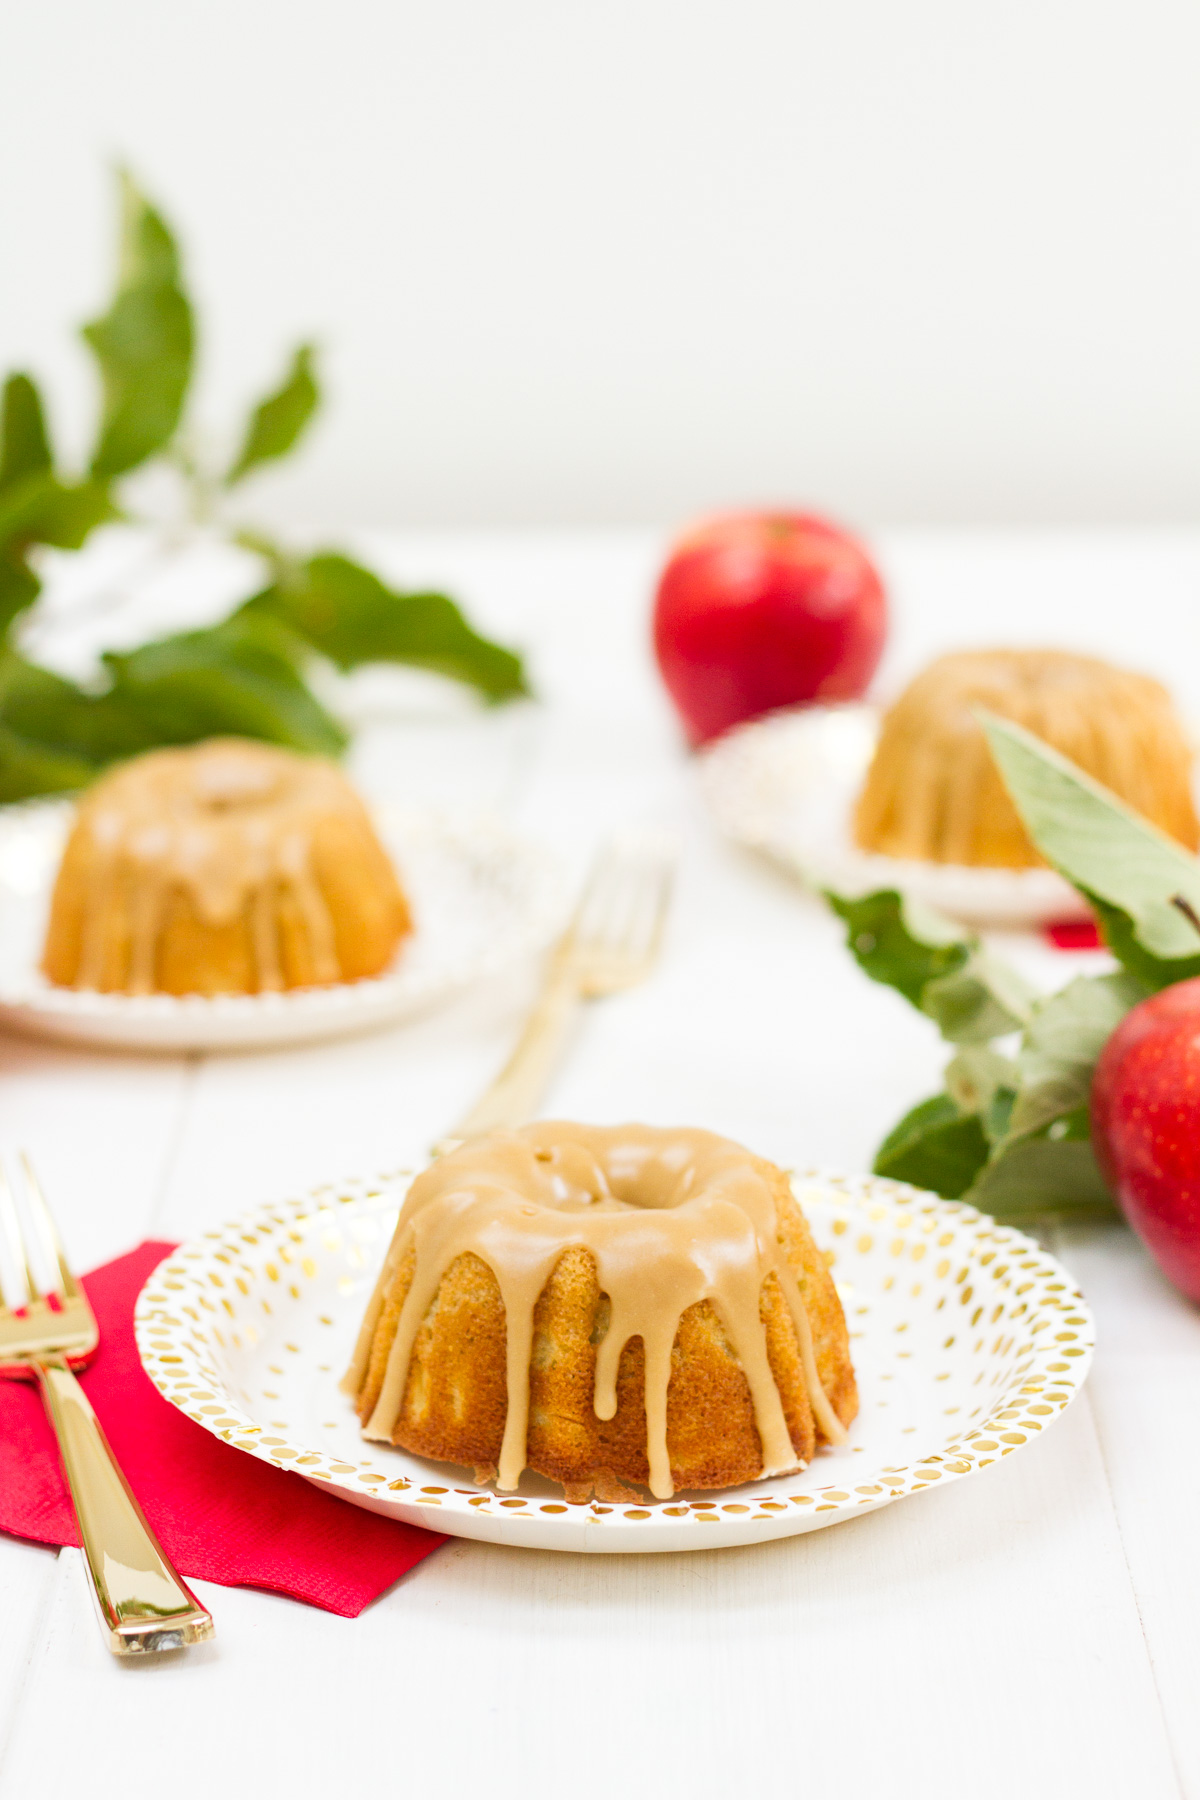 These mini apple spice bundt cakes combine a few of my fall favorites--tart apples, warm spices, and buttery caramel. They are easy to make, and they taste as good as they look!